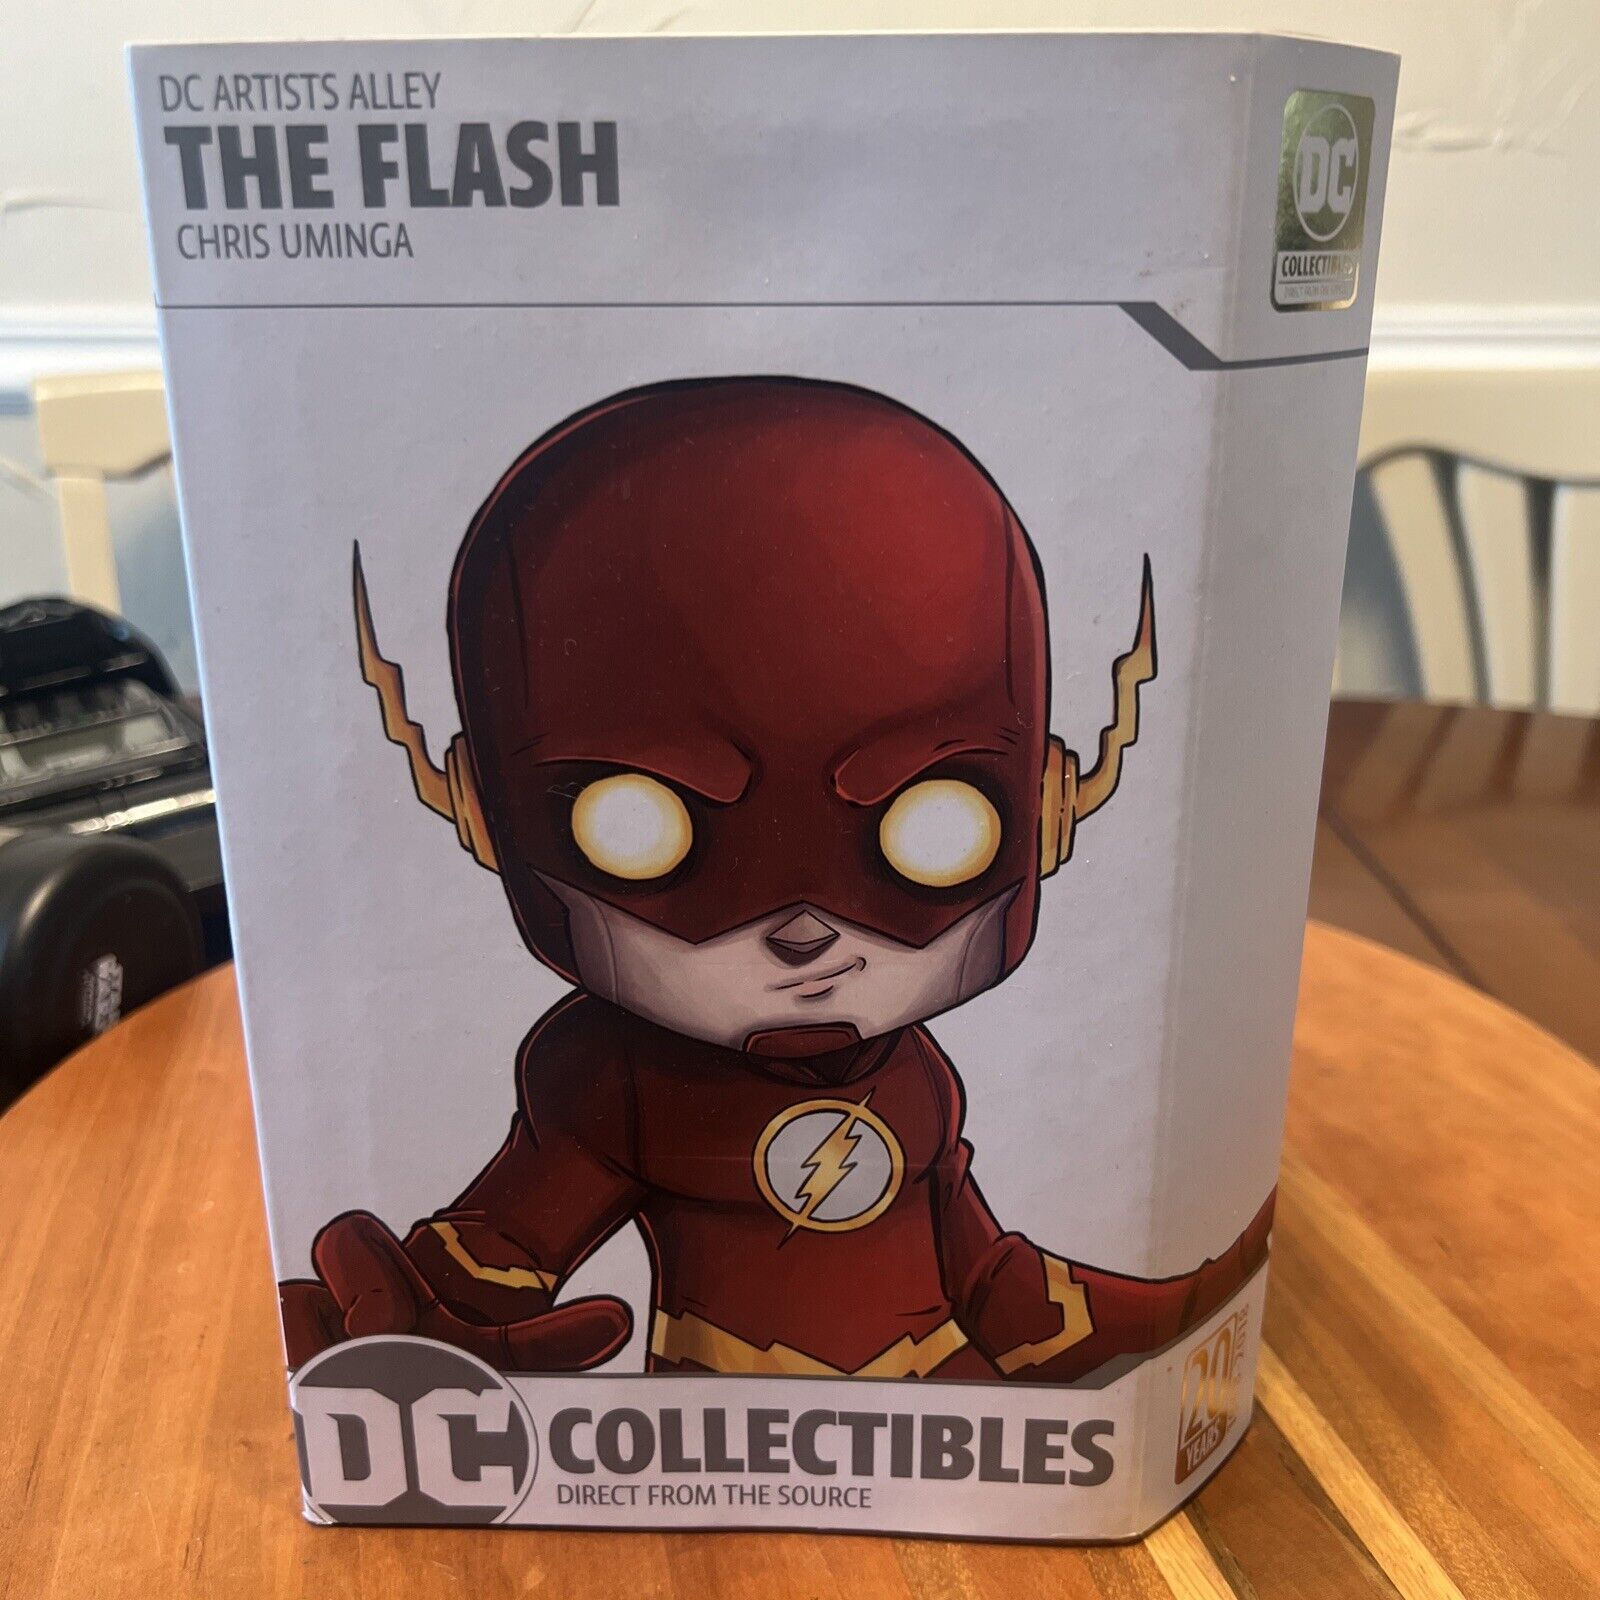 DC Collectibles DC Artists Alley: The Flash by Chris Uminga Designer Vinyl Fig.